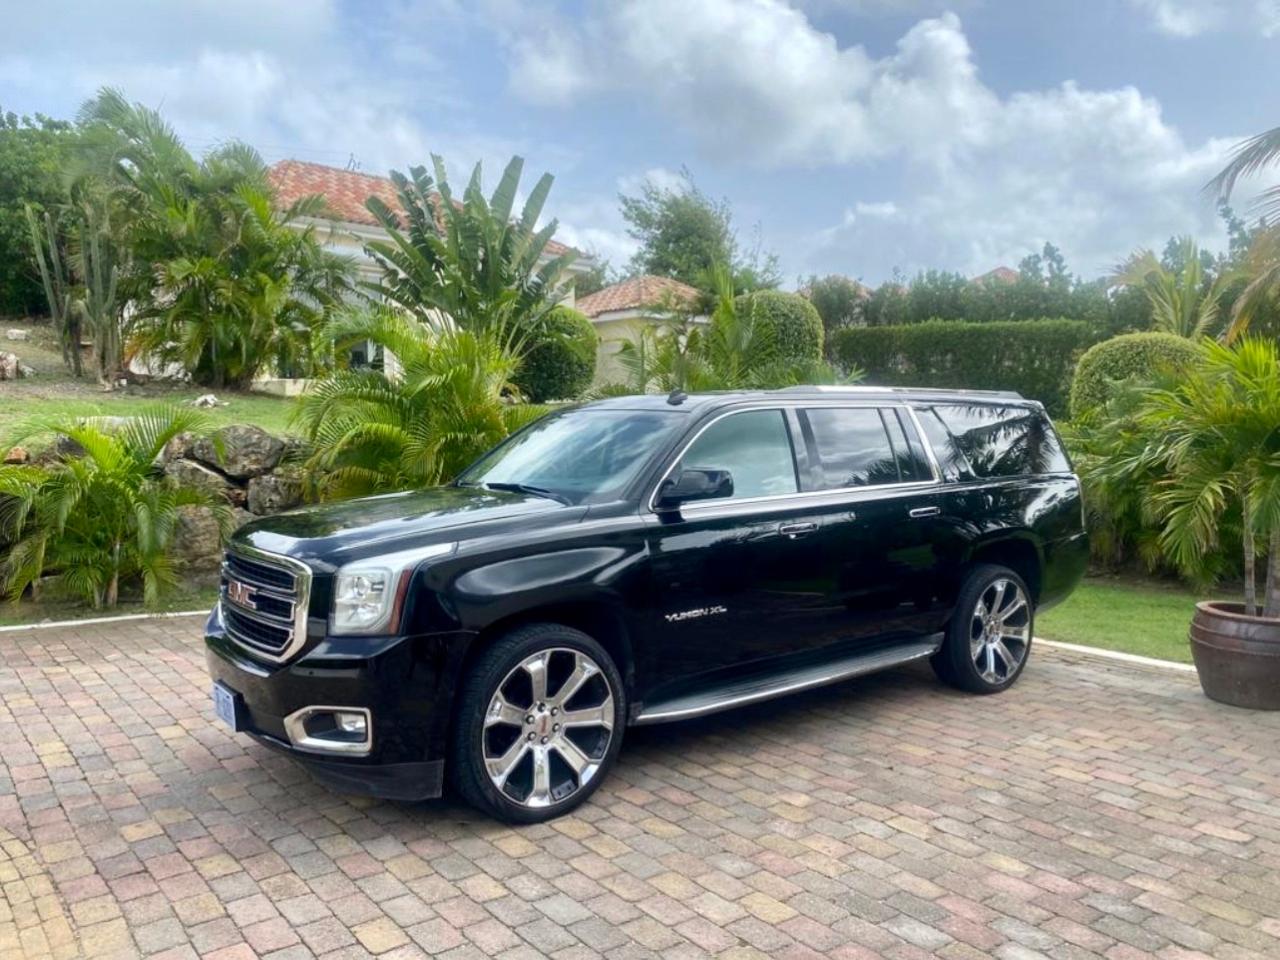 VIP Arrival Transfer to St. Maarten/St. Martin Hotel (Zone 7)